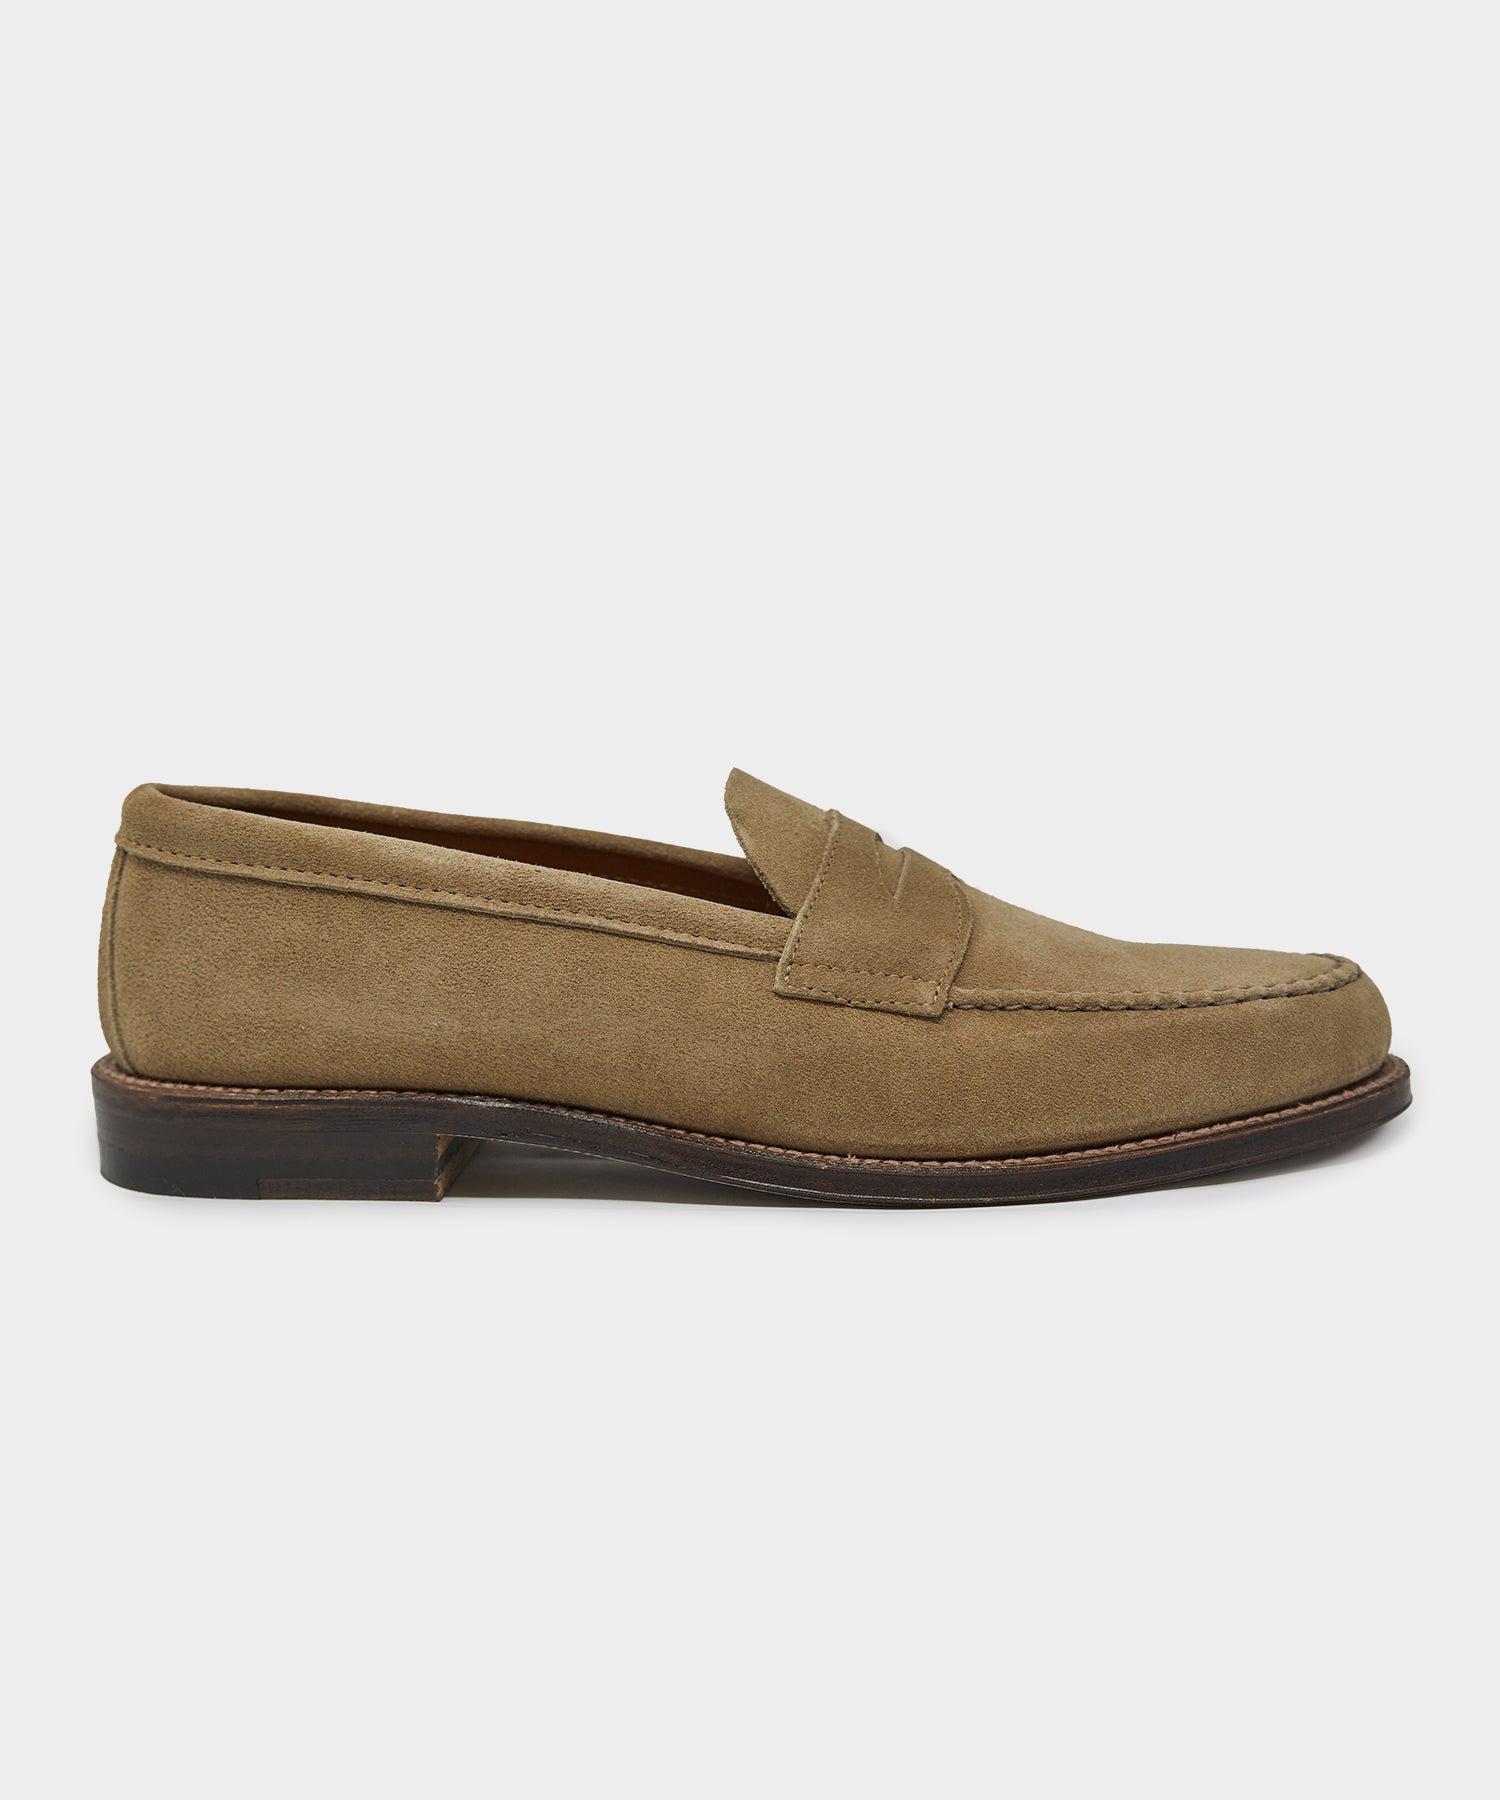 Alden Unlined Leisure Handsewn Loafer In Tan Suede